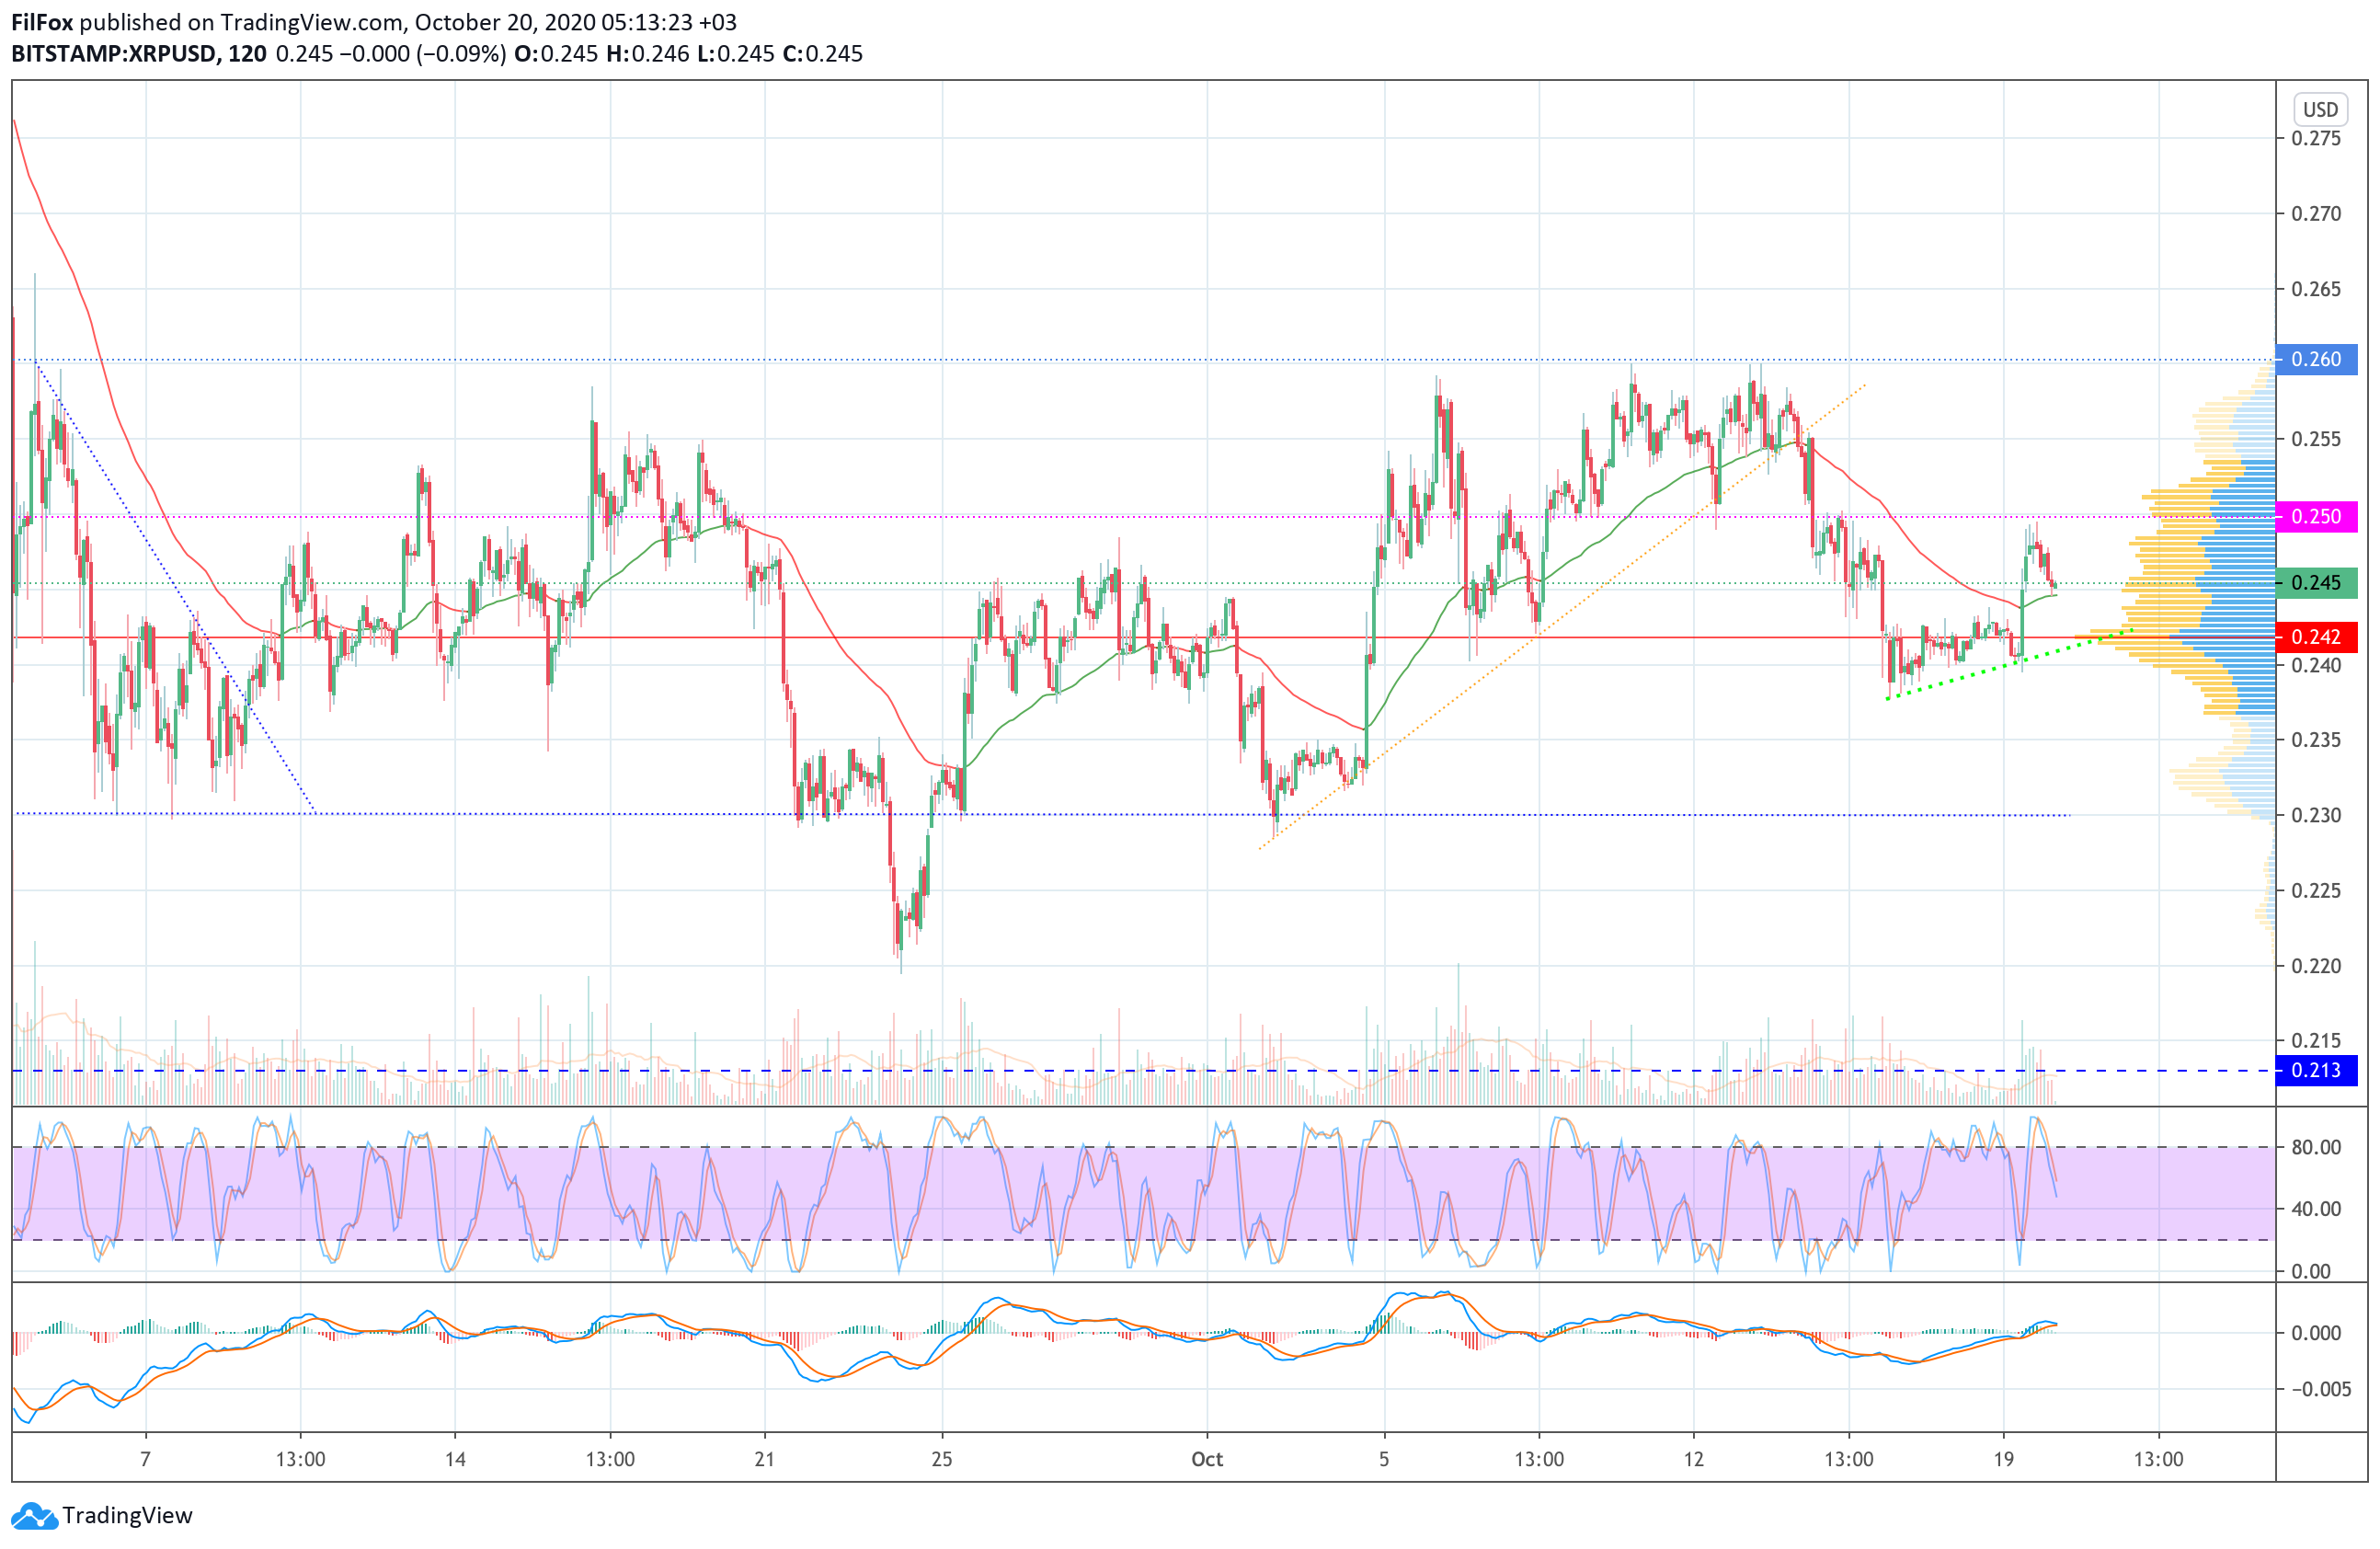 Analysis of prices for Bitcoin, Ethereum, XRP for 10/20/2020